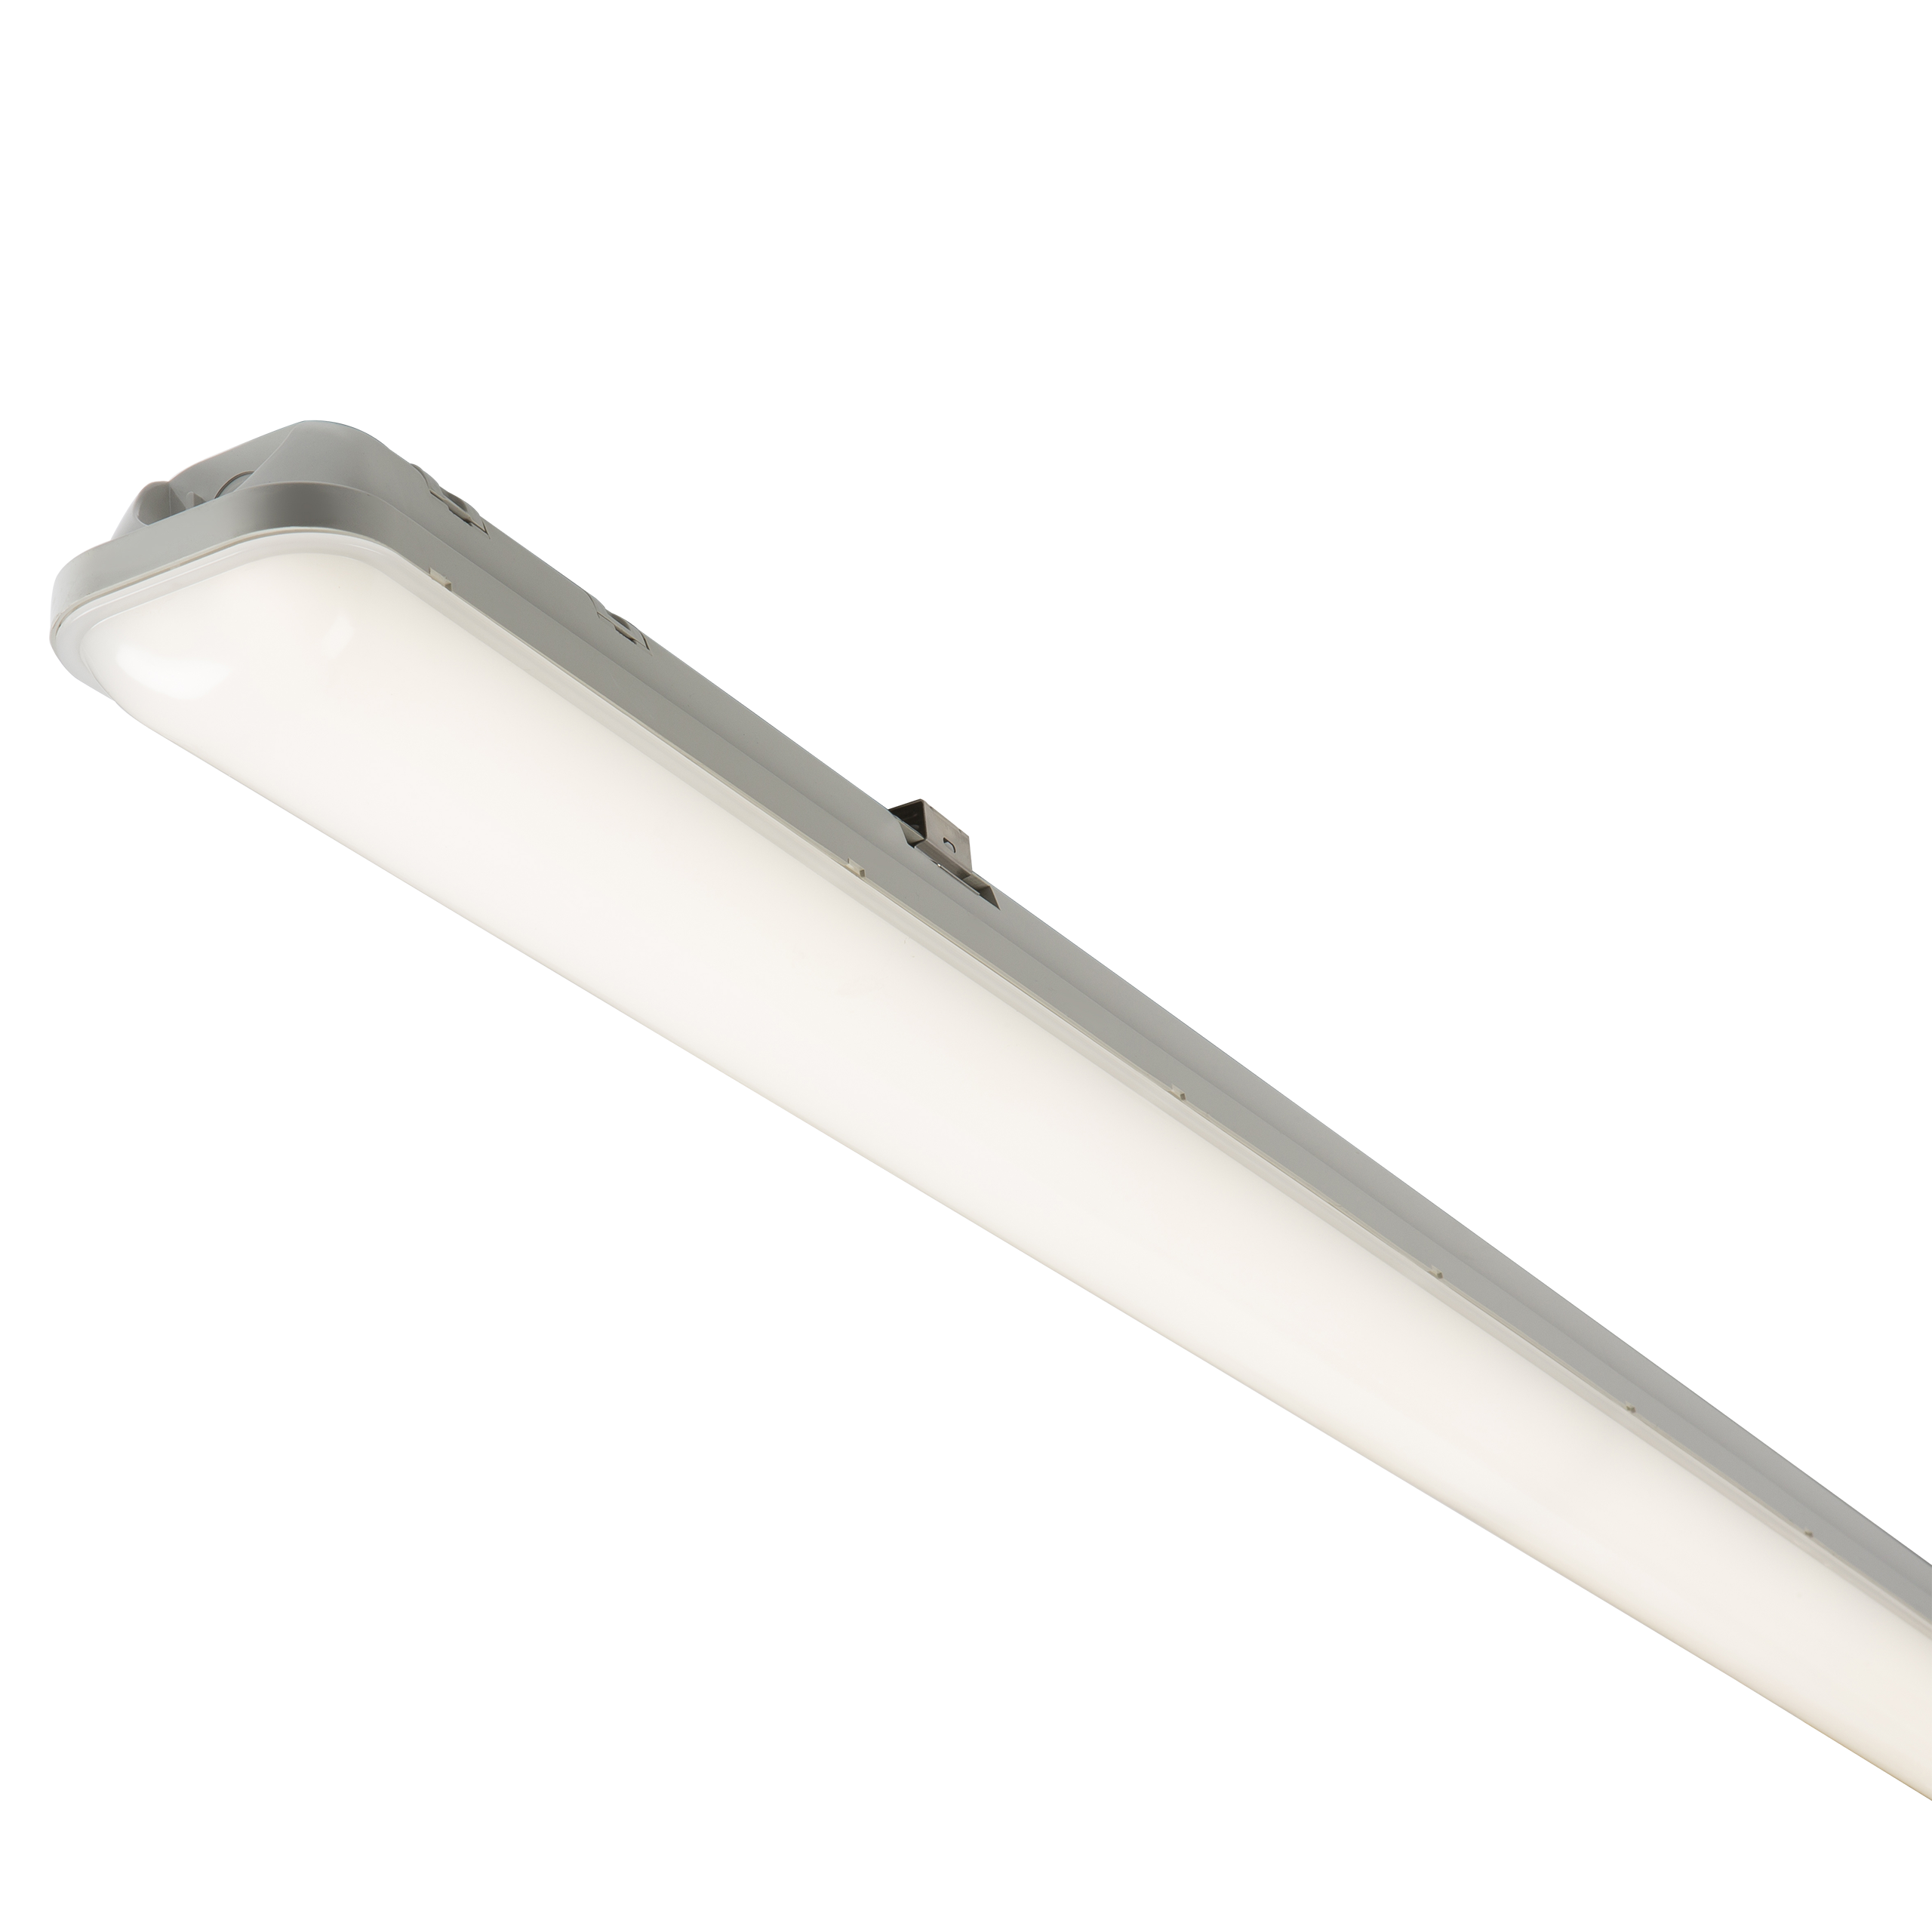 230V IP65 5ft 60W LED Non-Corrosive Fitting - 1480mm - NCLED60 